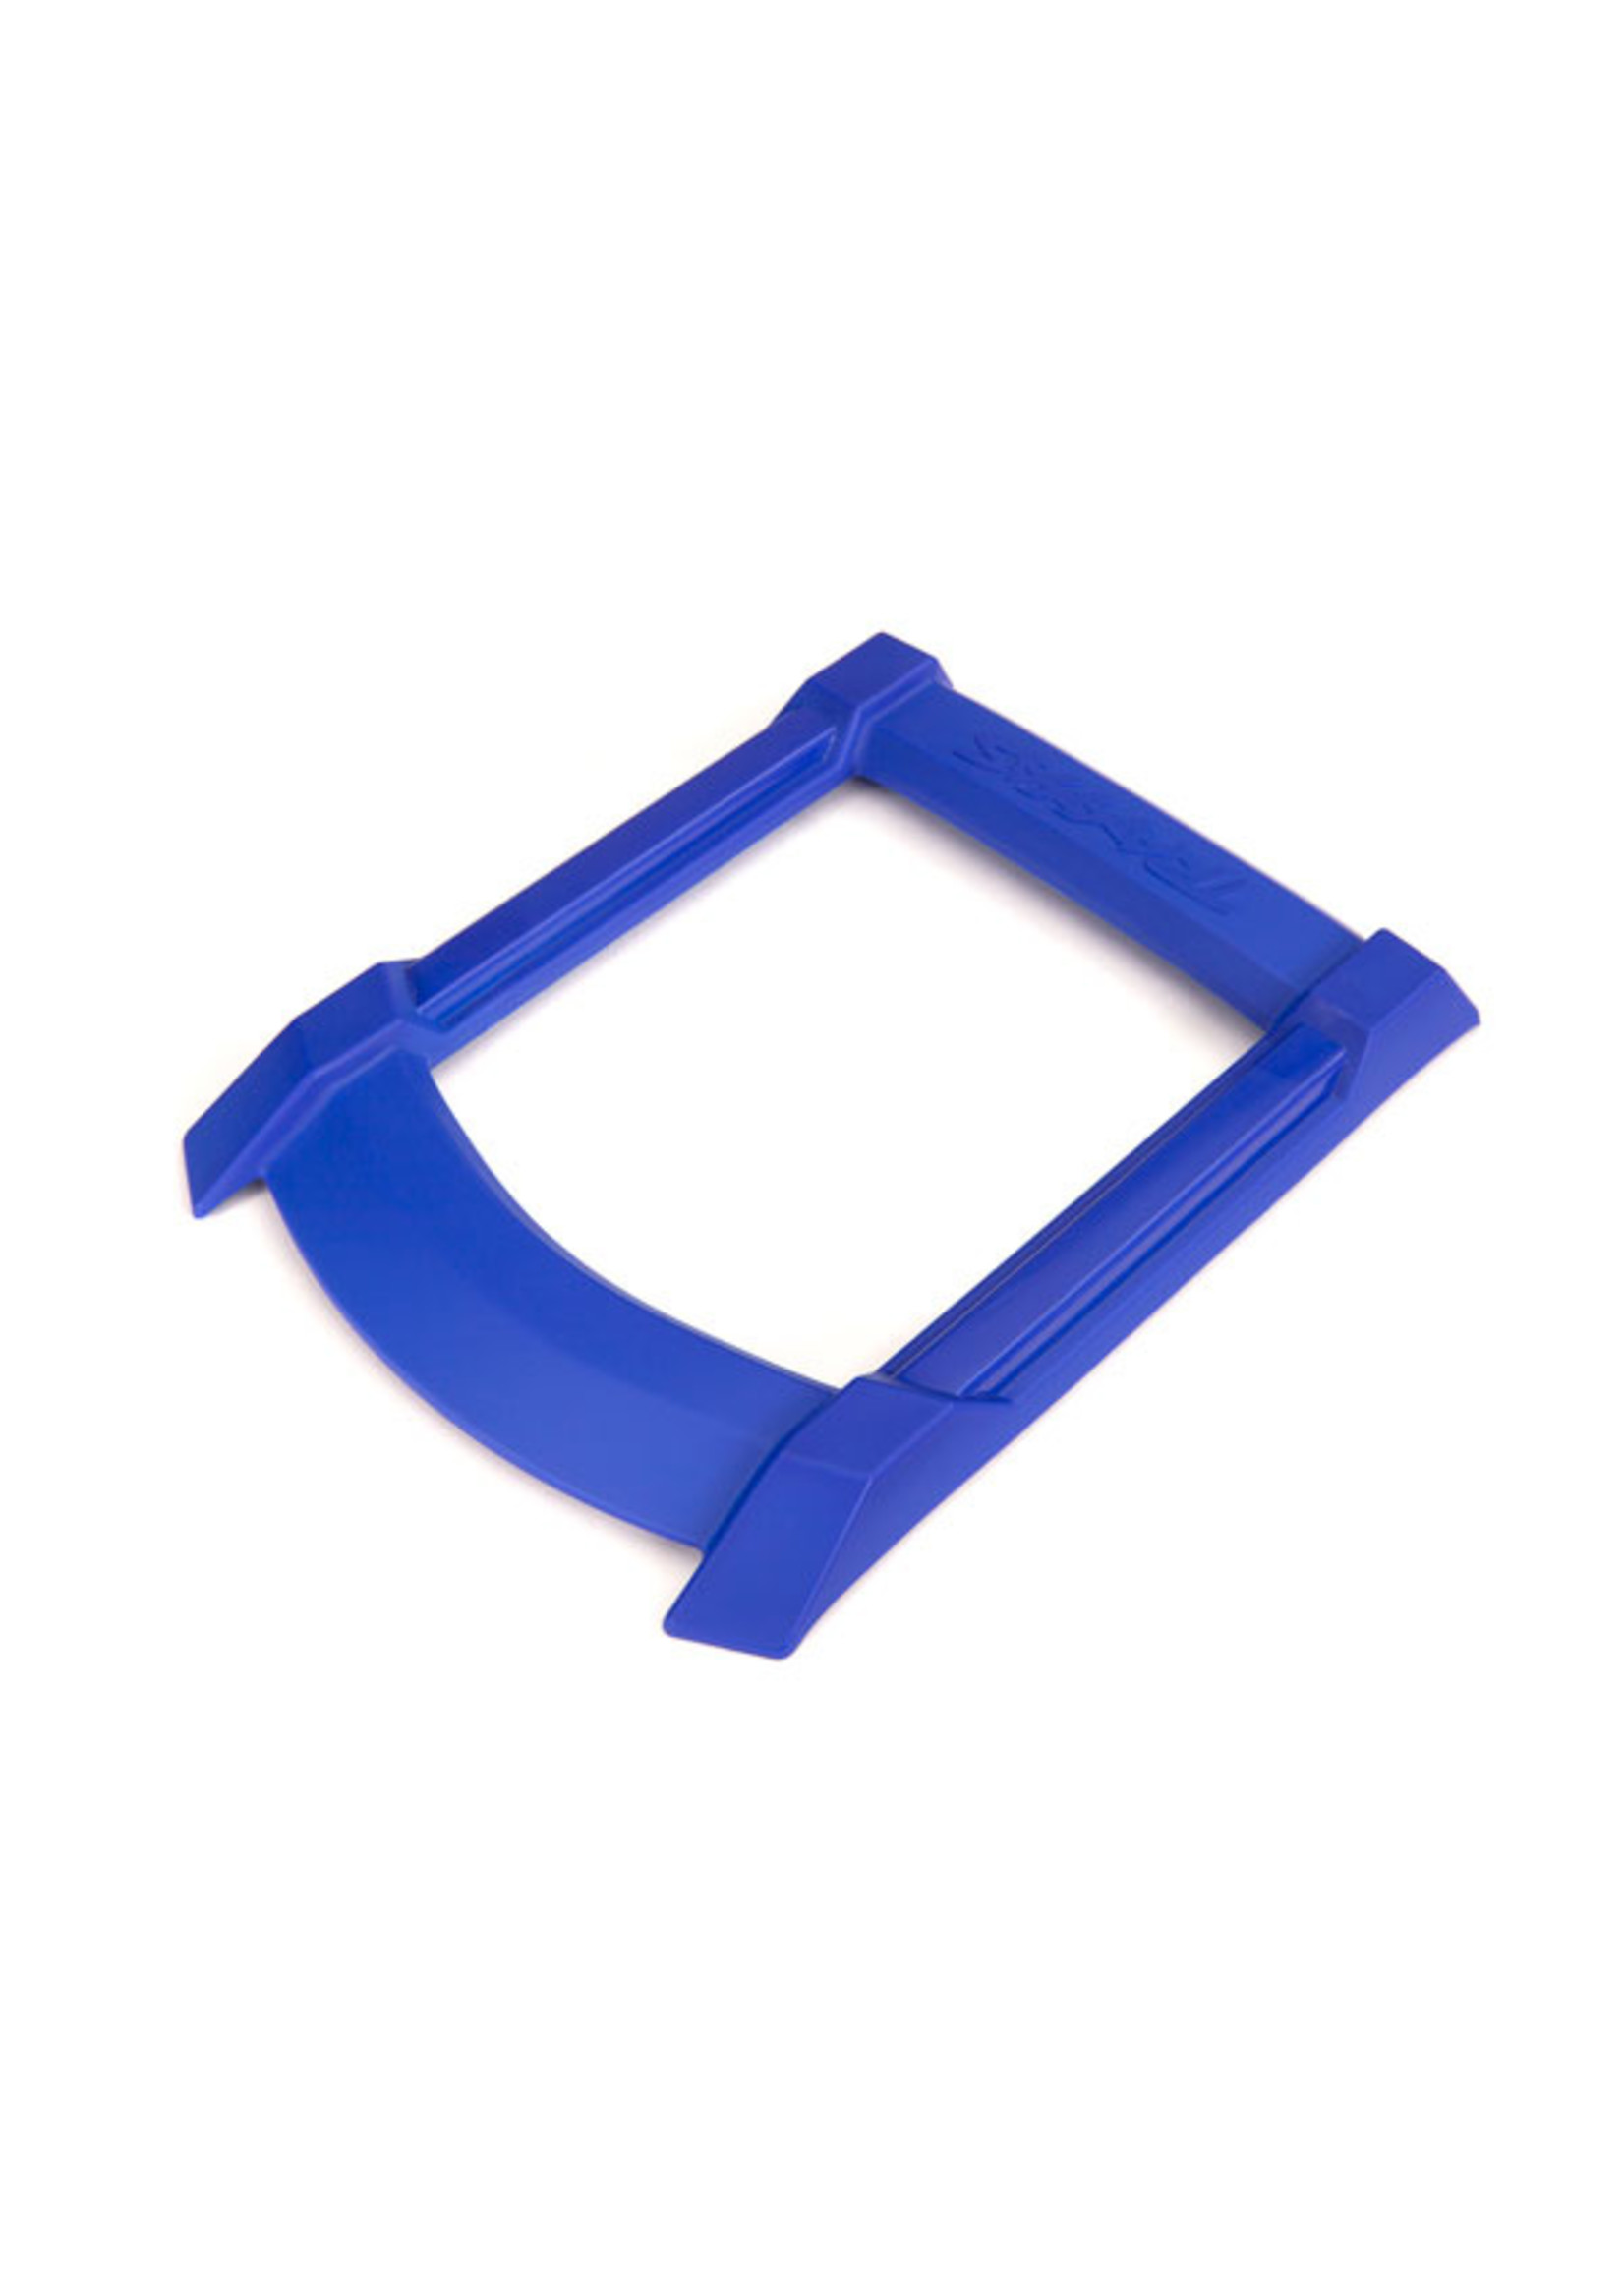 Traxxas 7817X - Skid Plate Roof - Blue